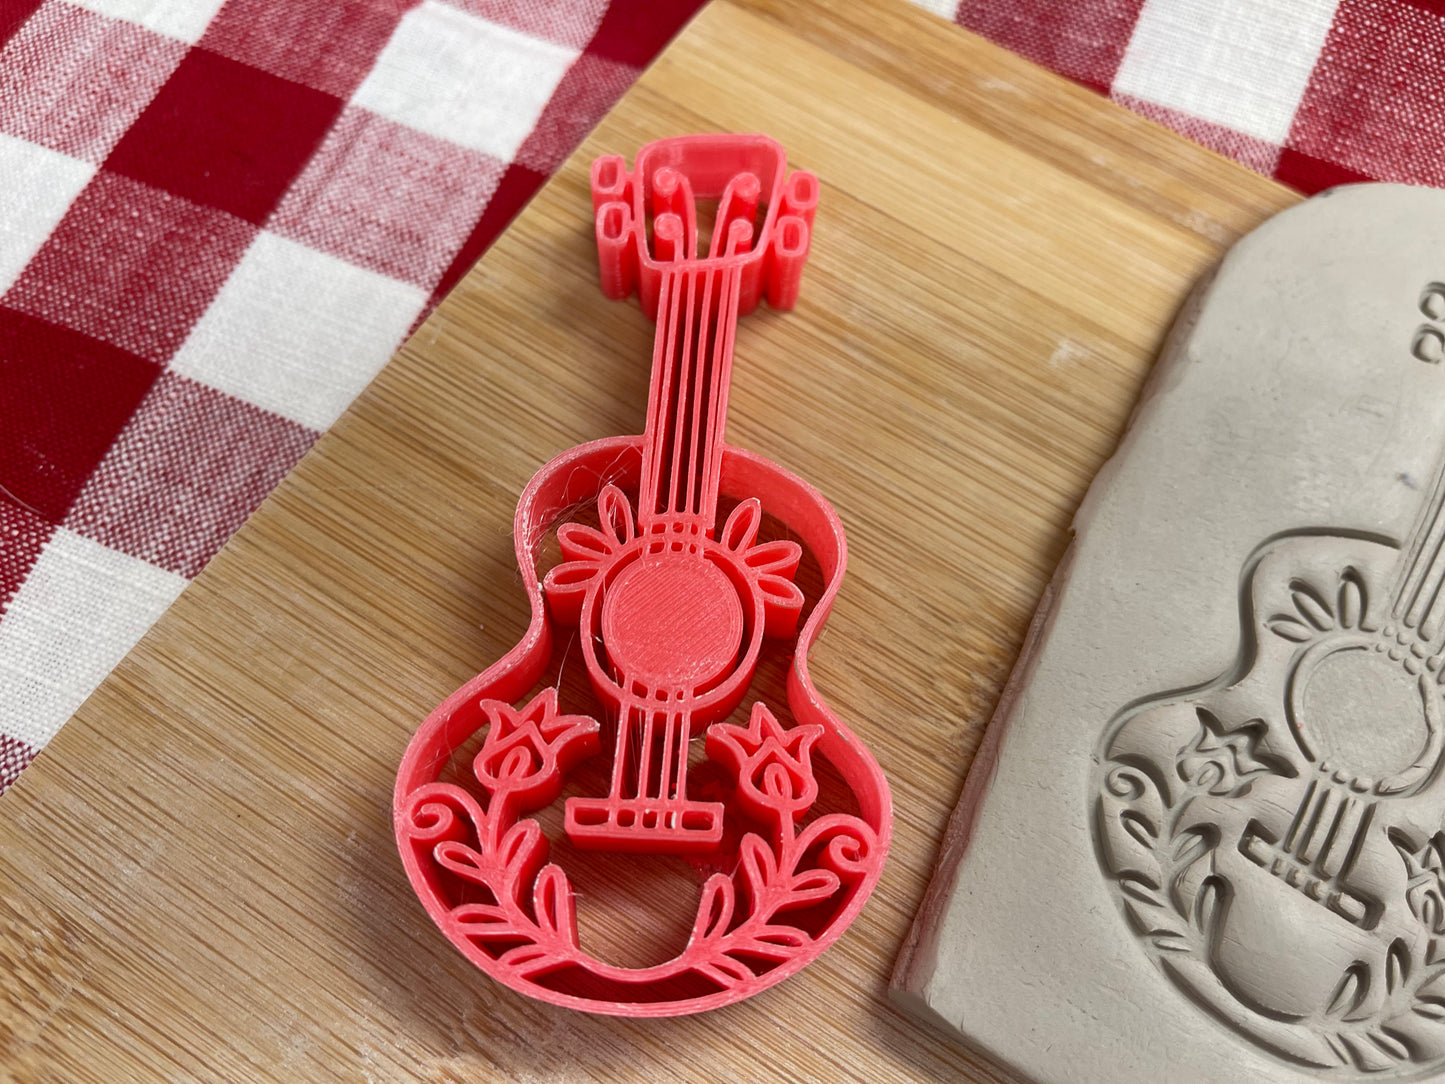 Guitar stamp, Day of the Dead Design, plastic 3D printed, pottery tool